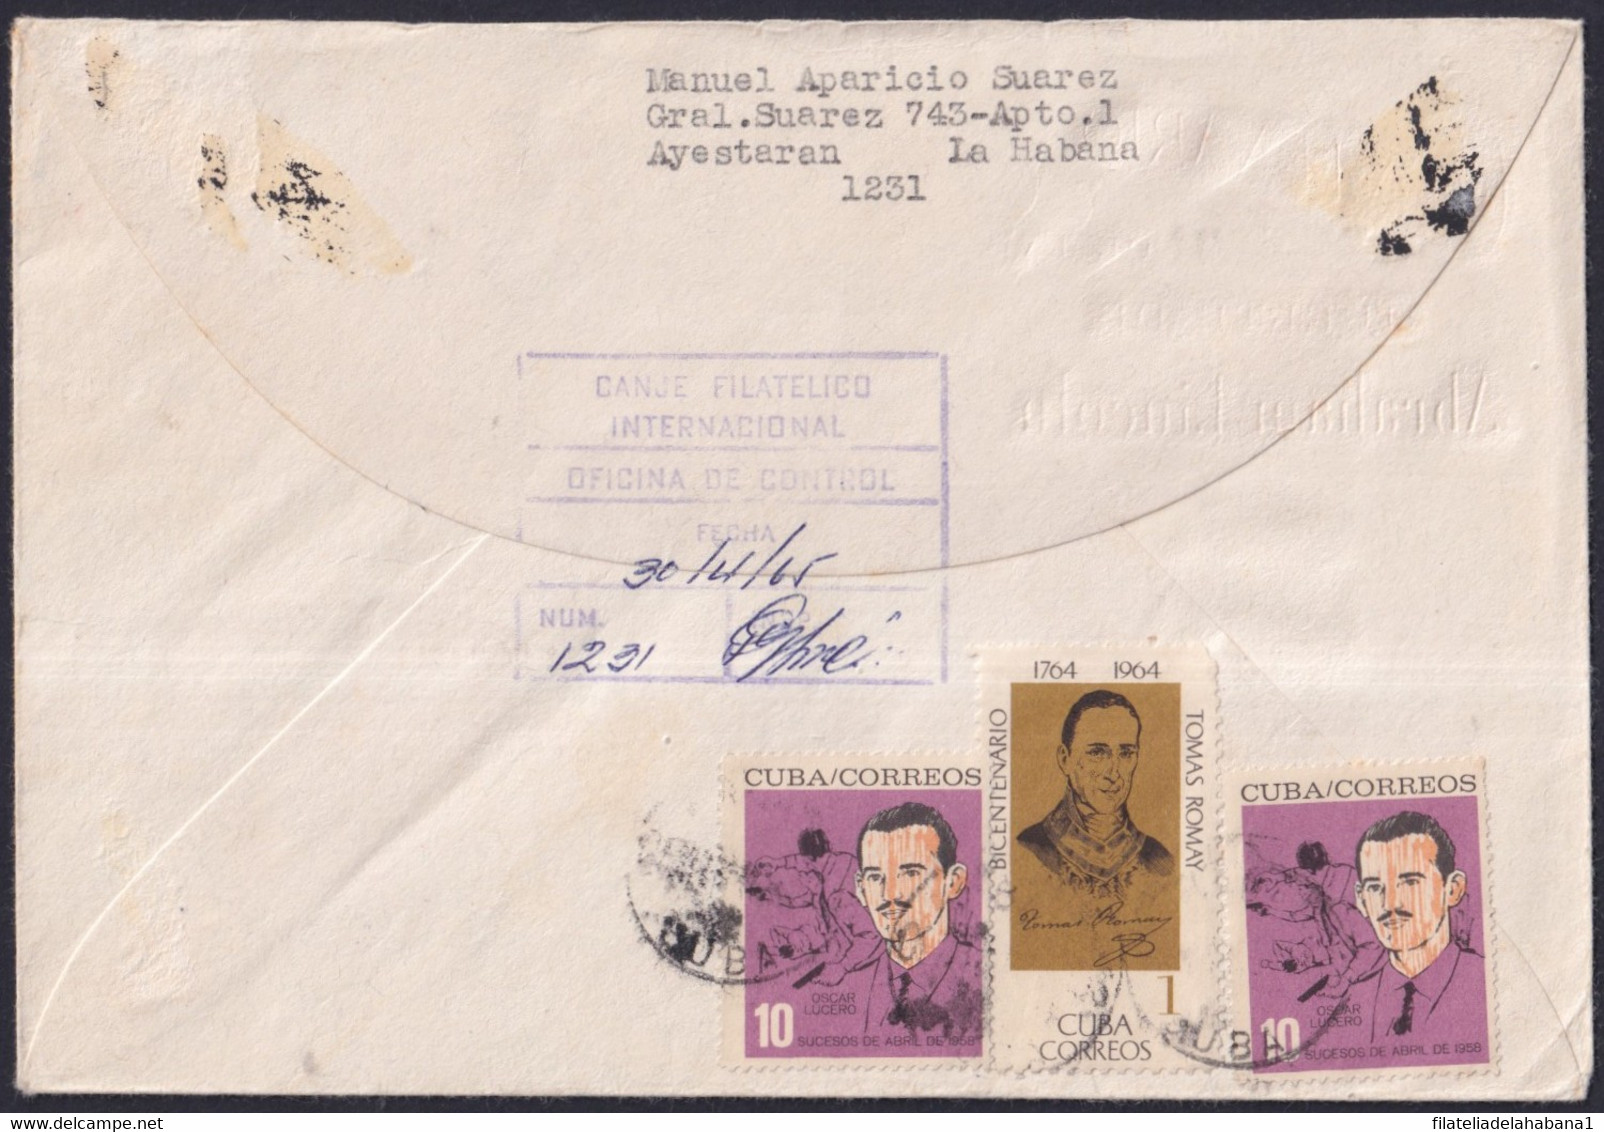 1965-FDC-96 CUBA 1965 FDC ABRAHAM LINCOLN REGISTERED COVER TO ESPAÑA SPAIN. - Lettres & Documents